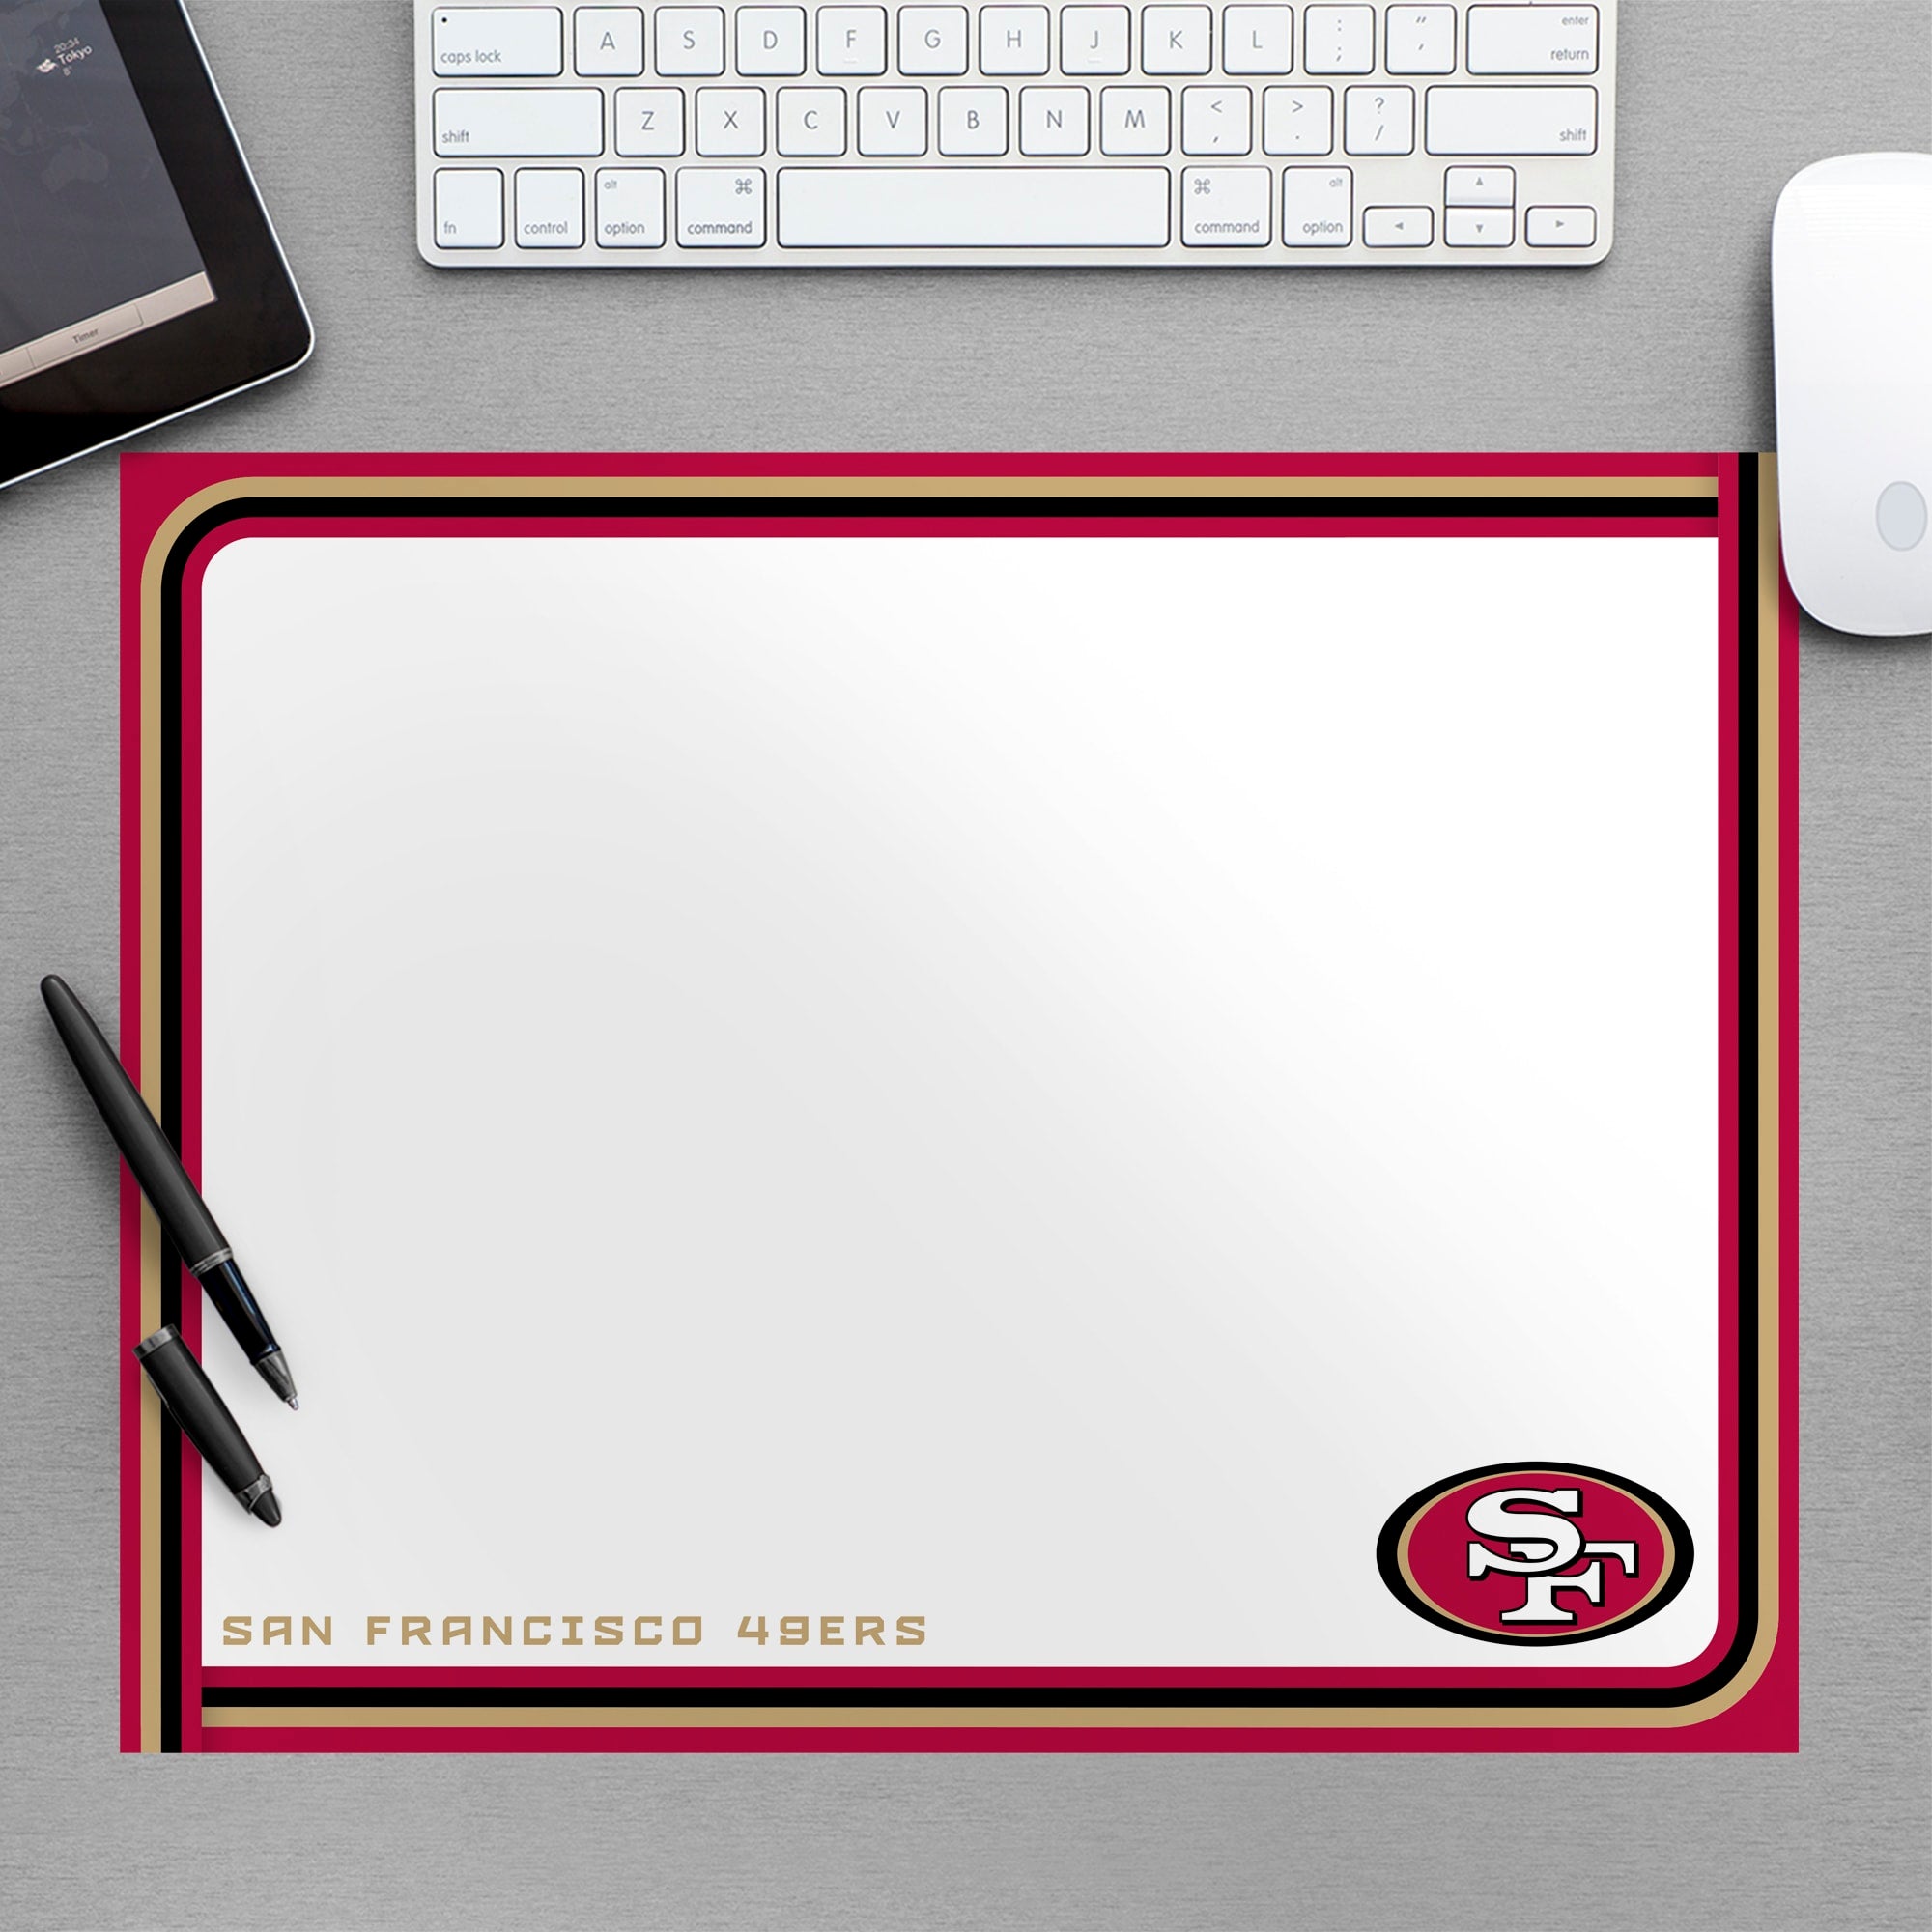 San Francisco 49ers: Dry Erase Whiteboard - Officially Licensed NFL Removable Wall Decal Large by Fathead | Vinyl